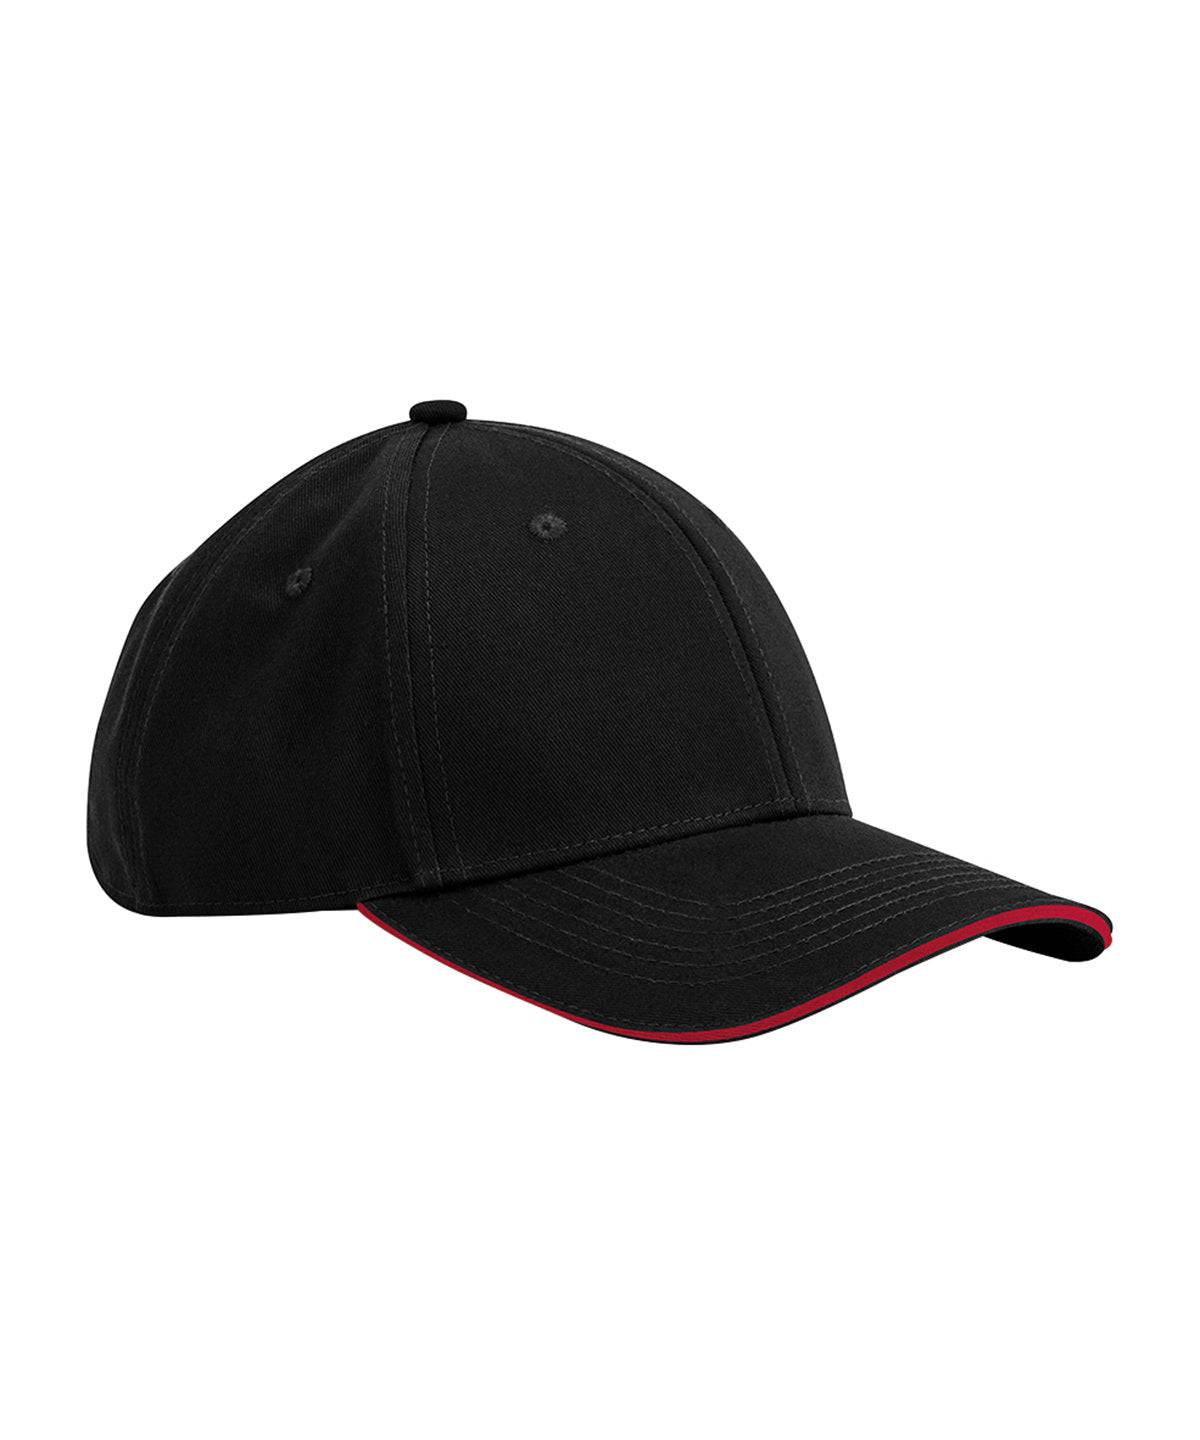 Load image into Gallery viewer, Black/Classic Red - EarthAware® classic organic cotton 6-panel cap – sandwich peak
